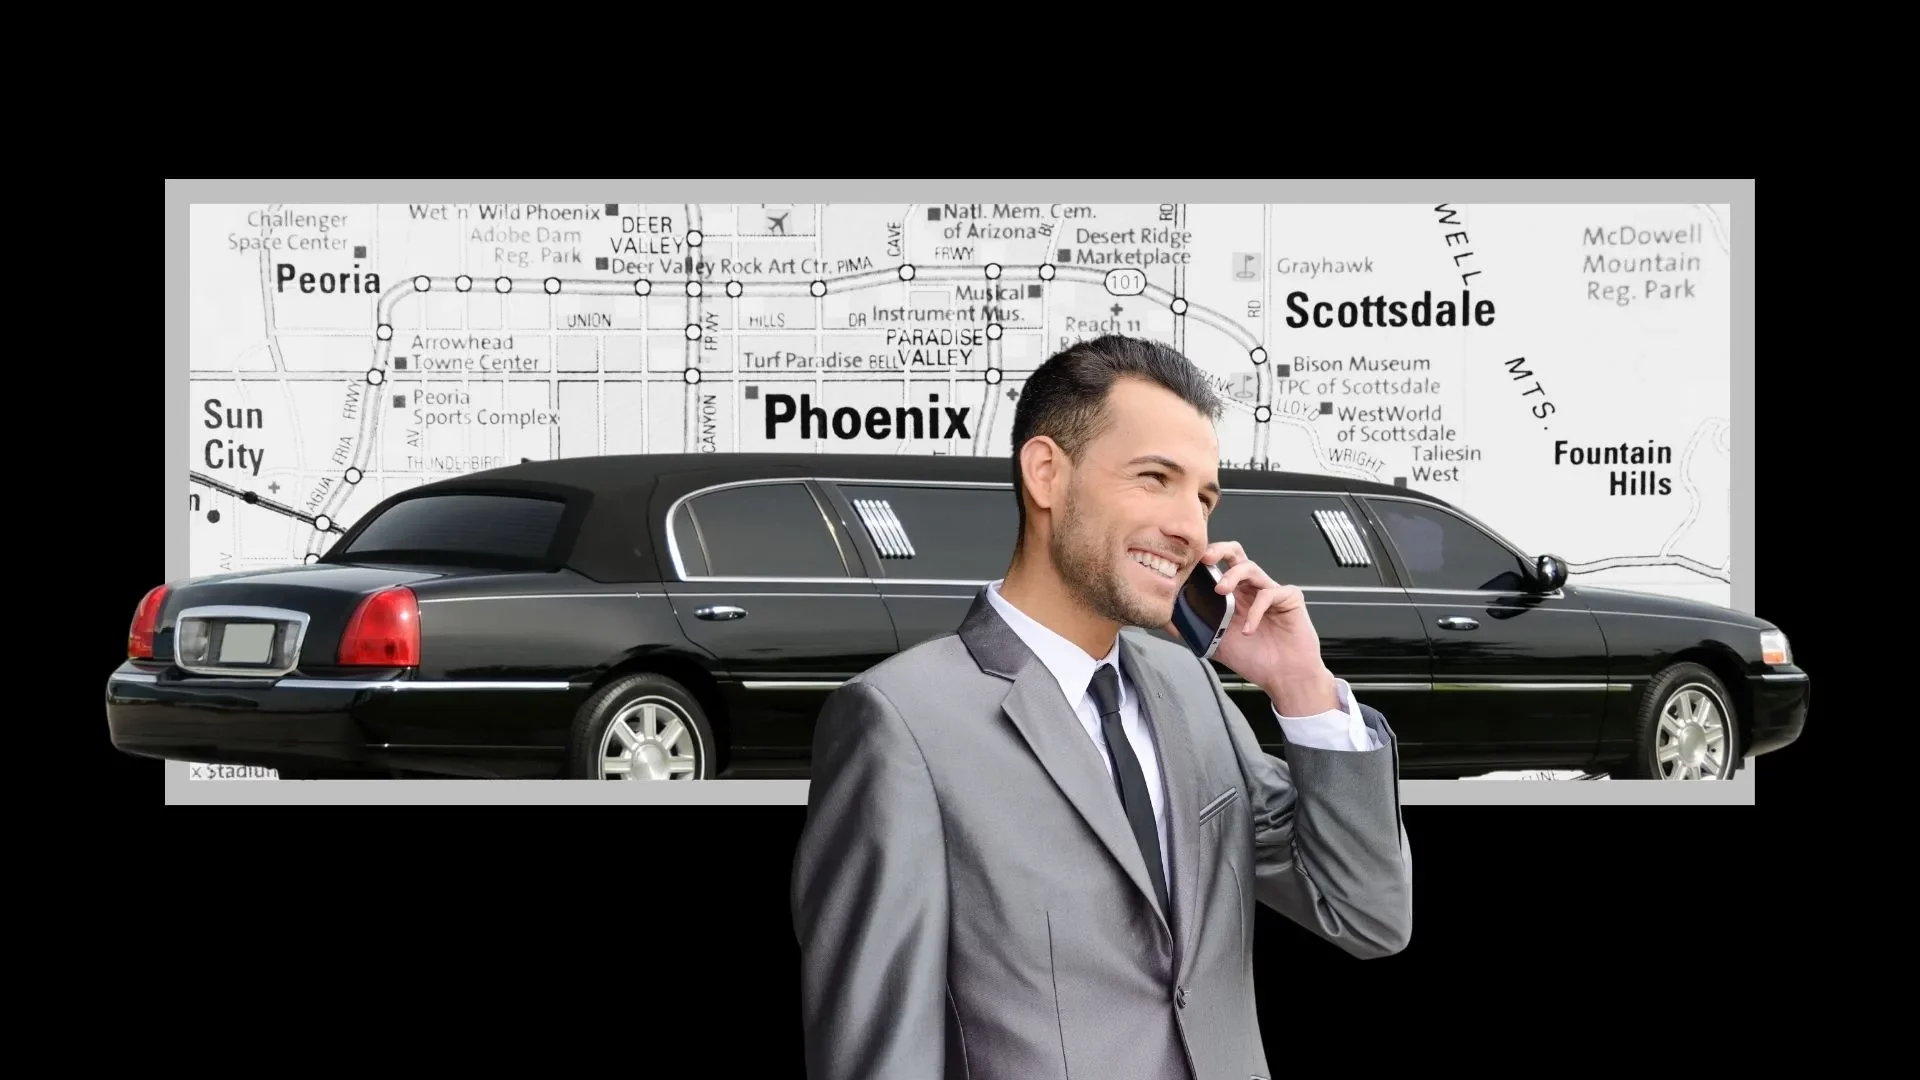 Map of Scottsdale and Paradise Valley with executive on phone I front of limousine service